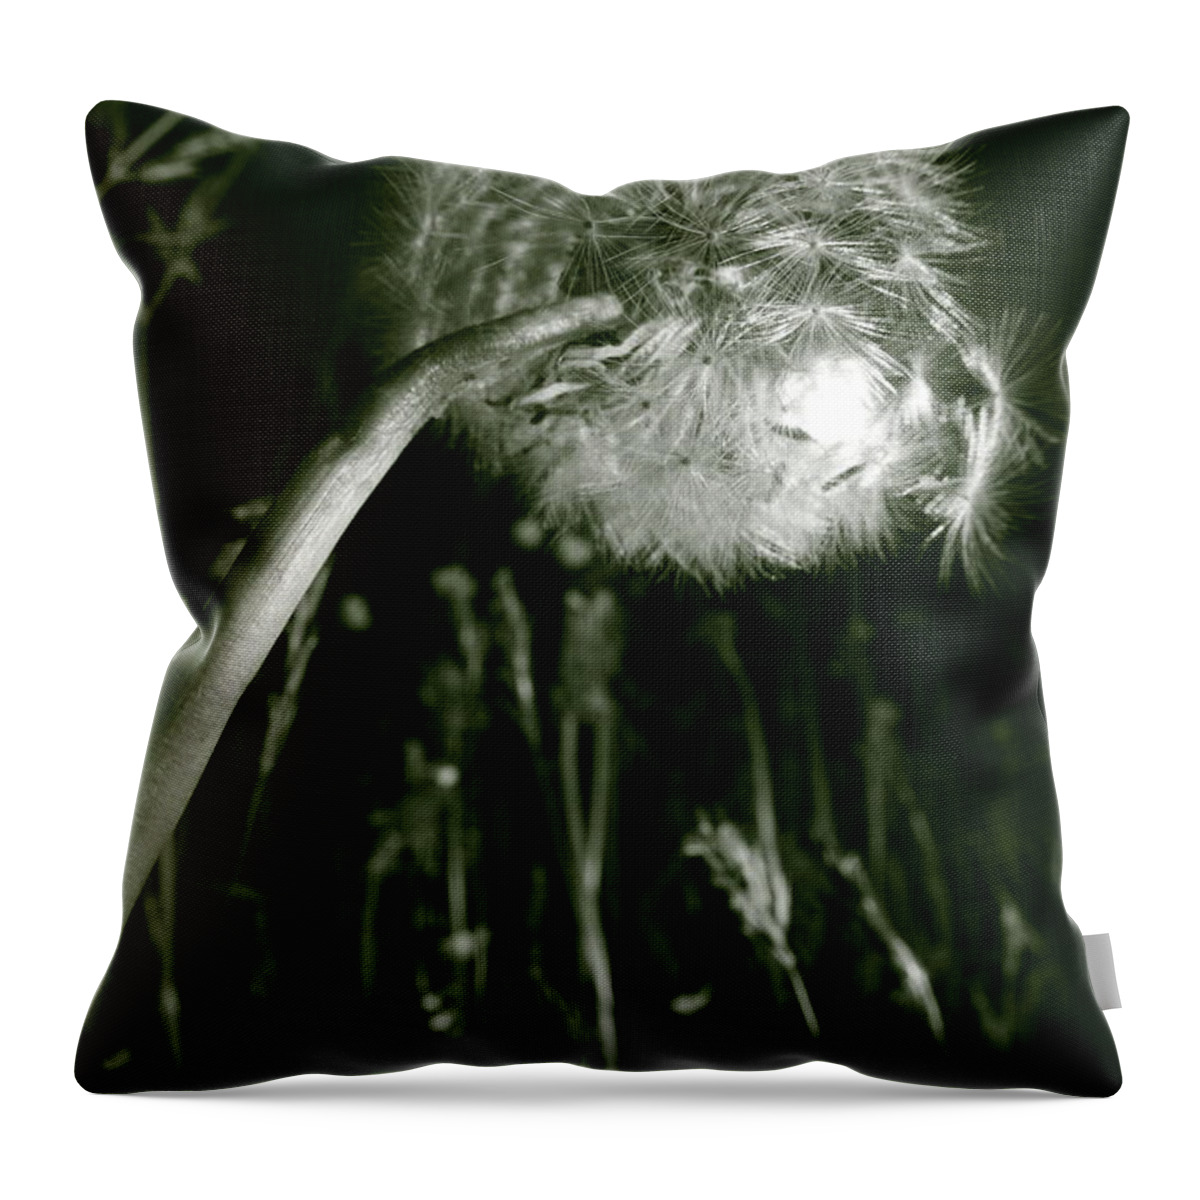 Beautiful Throw Pillow featuring the photograph Dandelion seed head in a meadow by Ulrich Kunst And Bettina Scheidulin